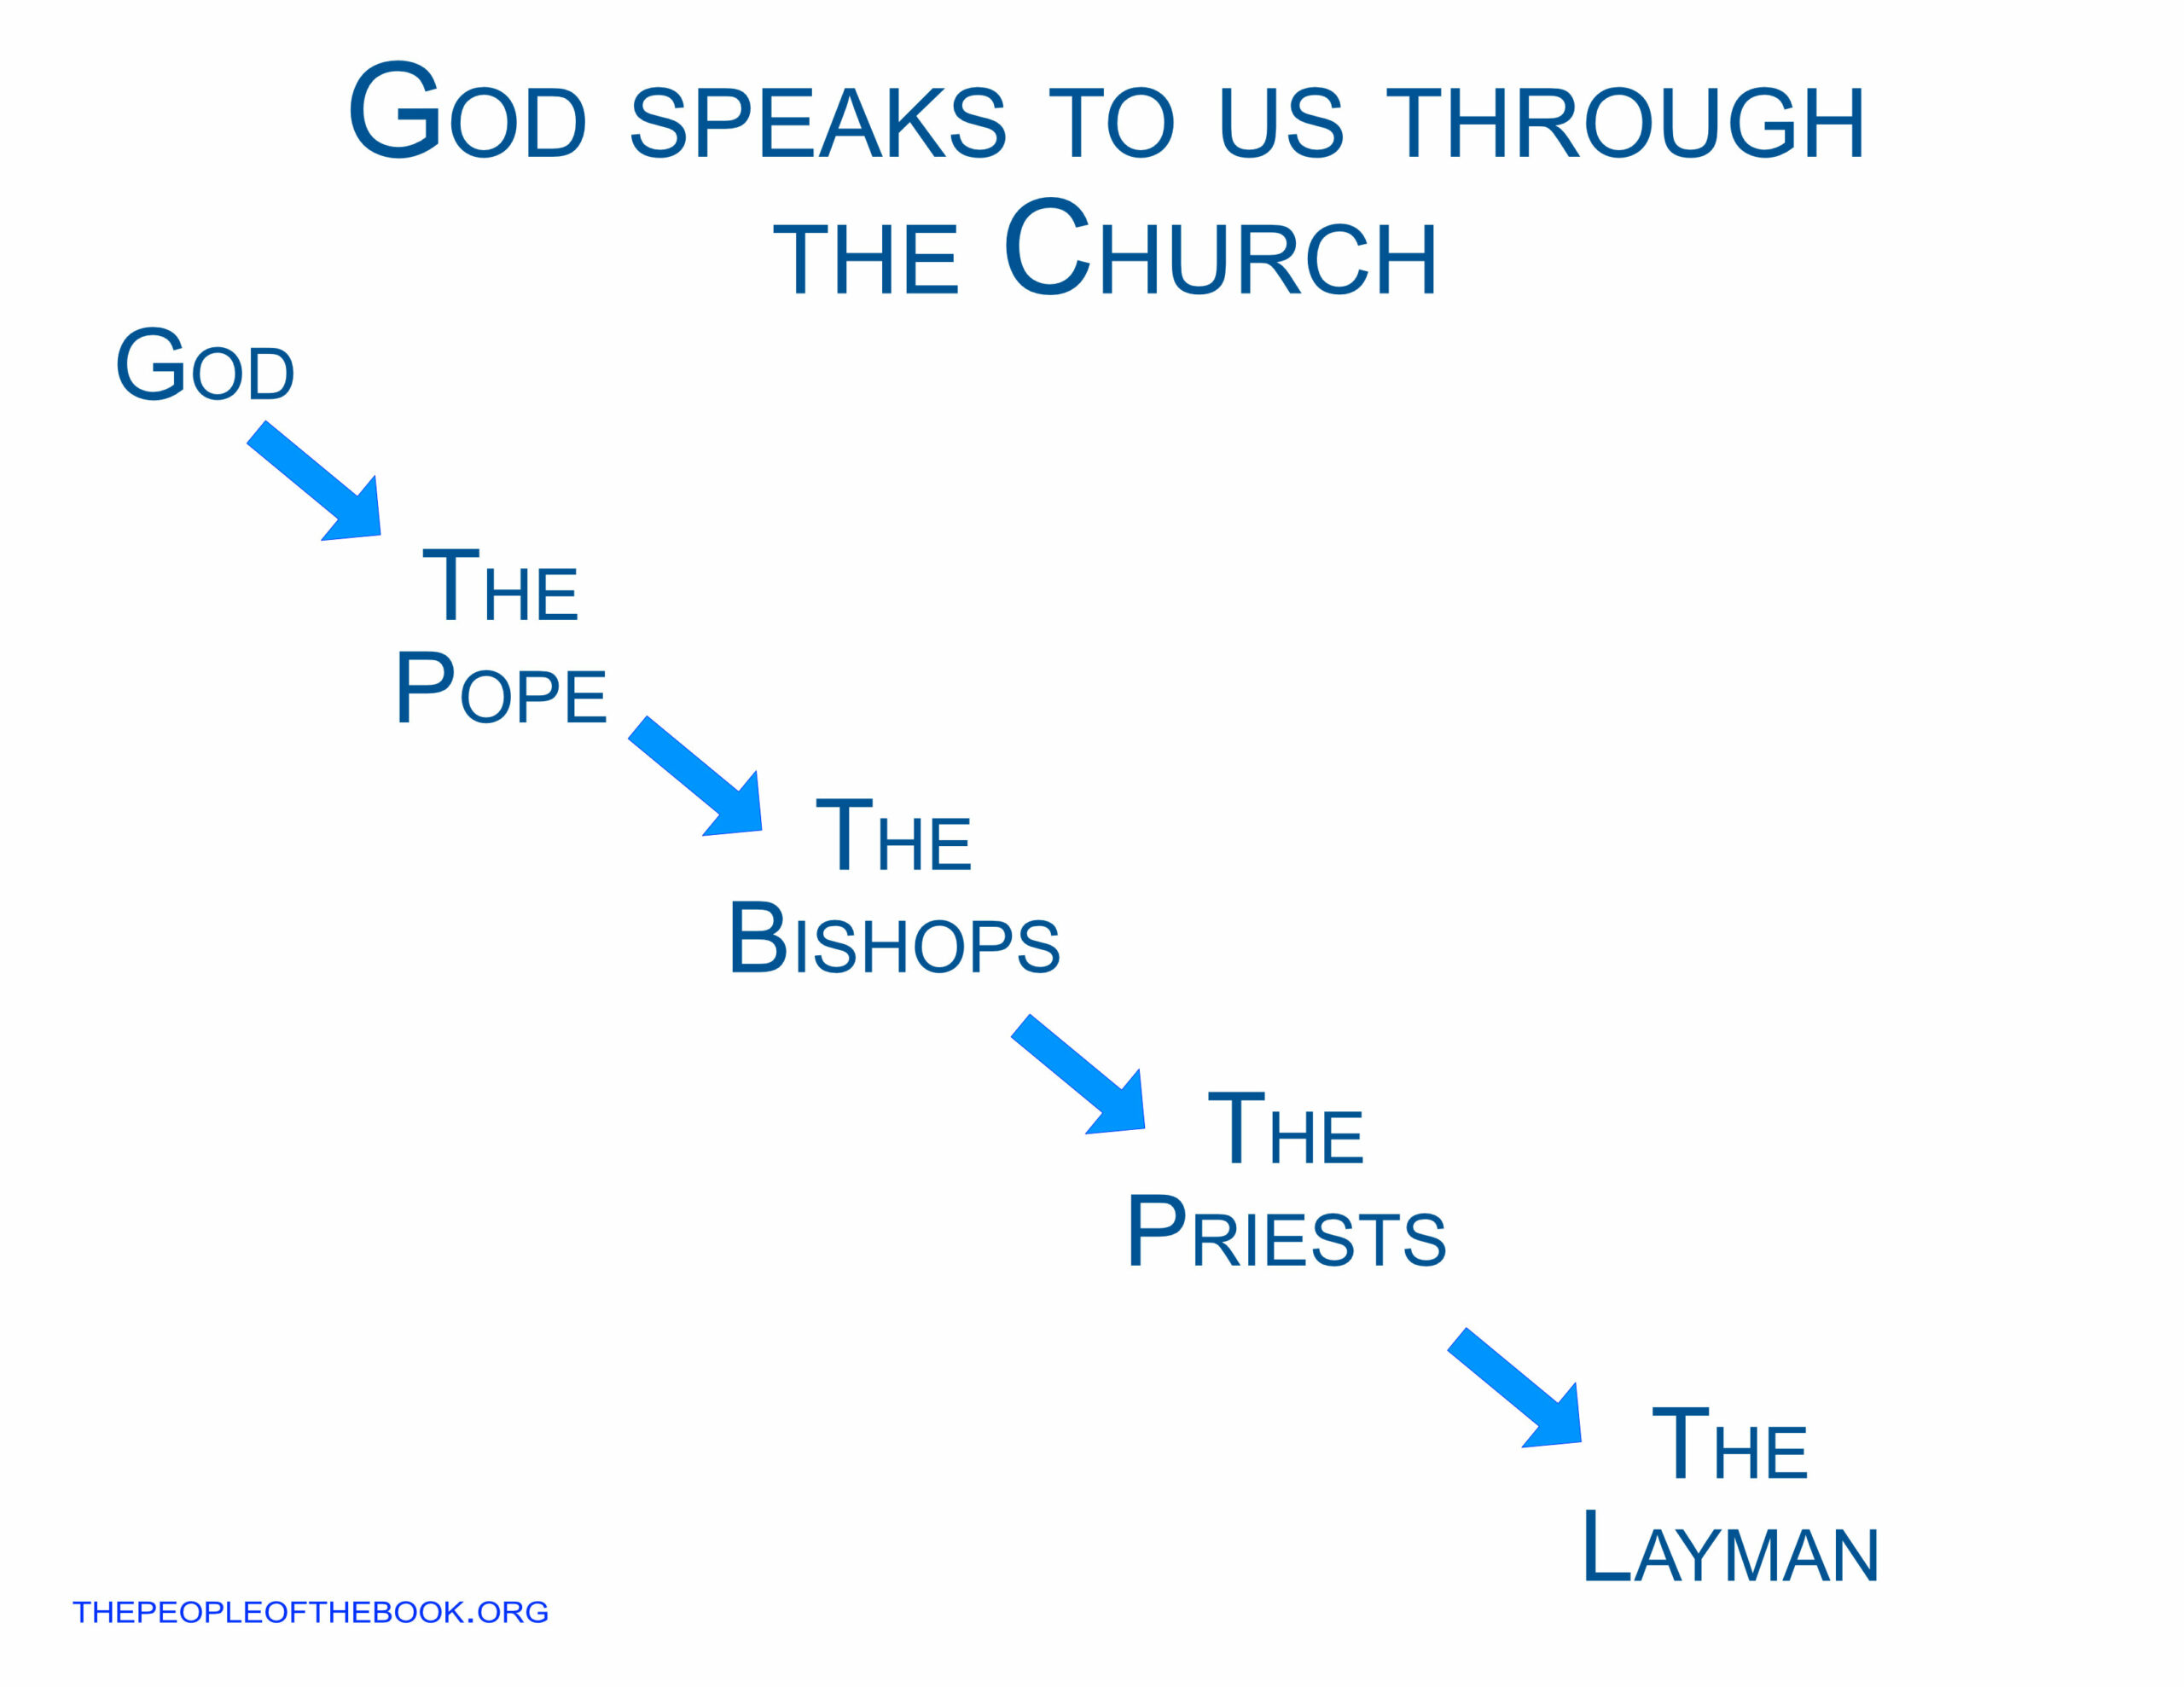 God speaks to us through The Church by way of the Pope, the bishops, the priests and then to all the layman